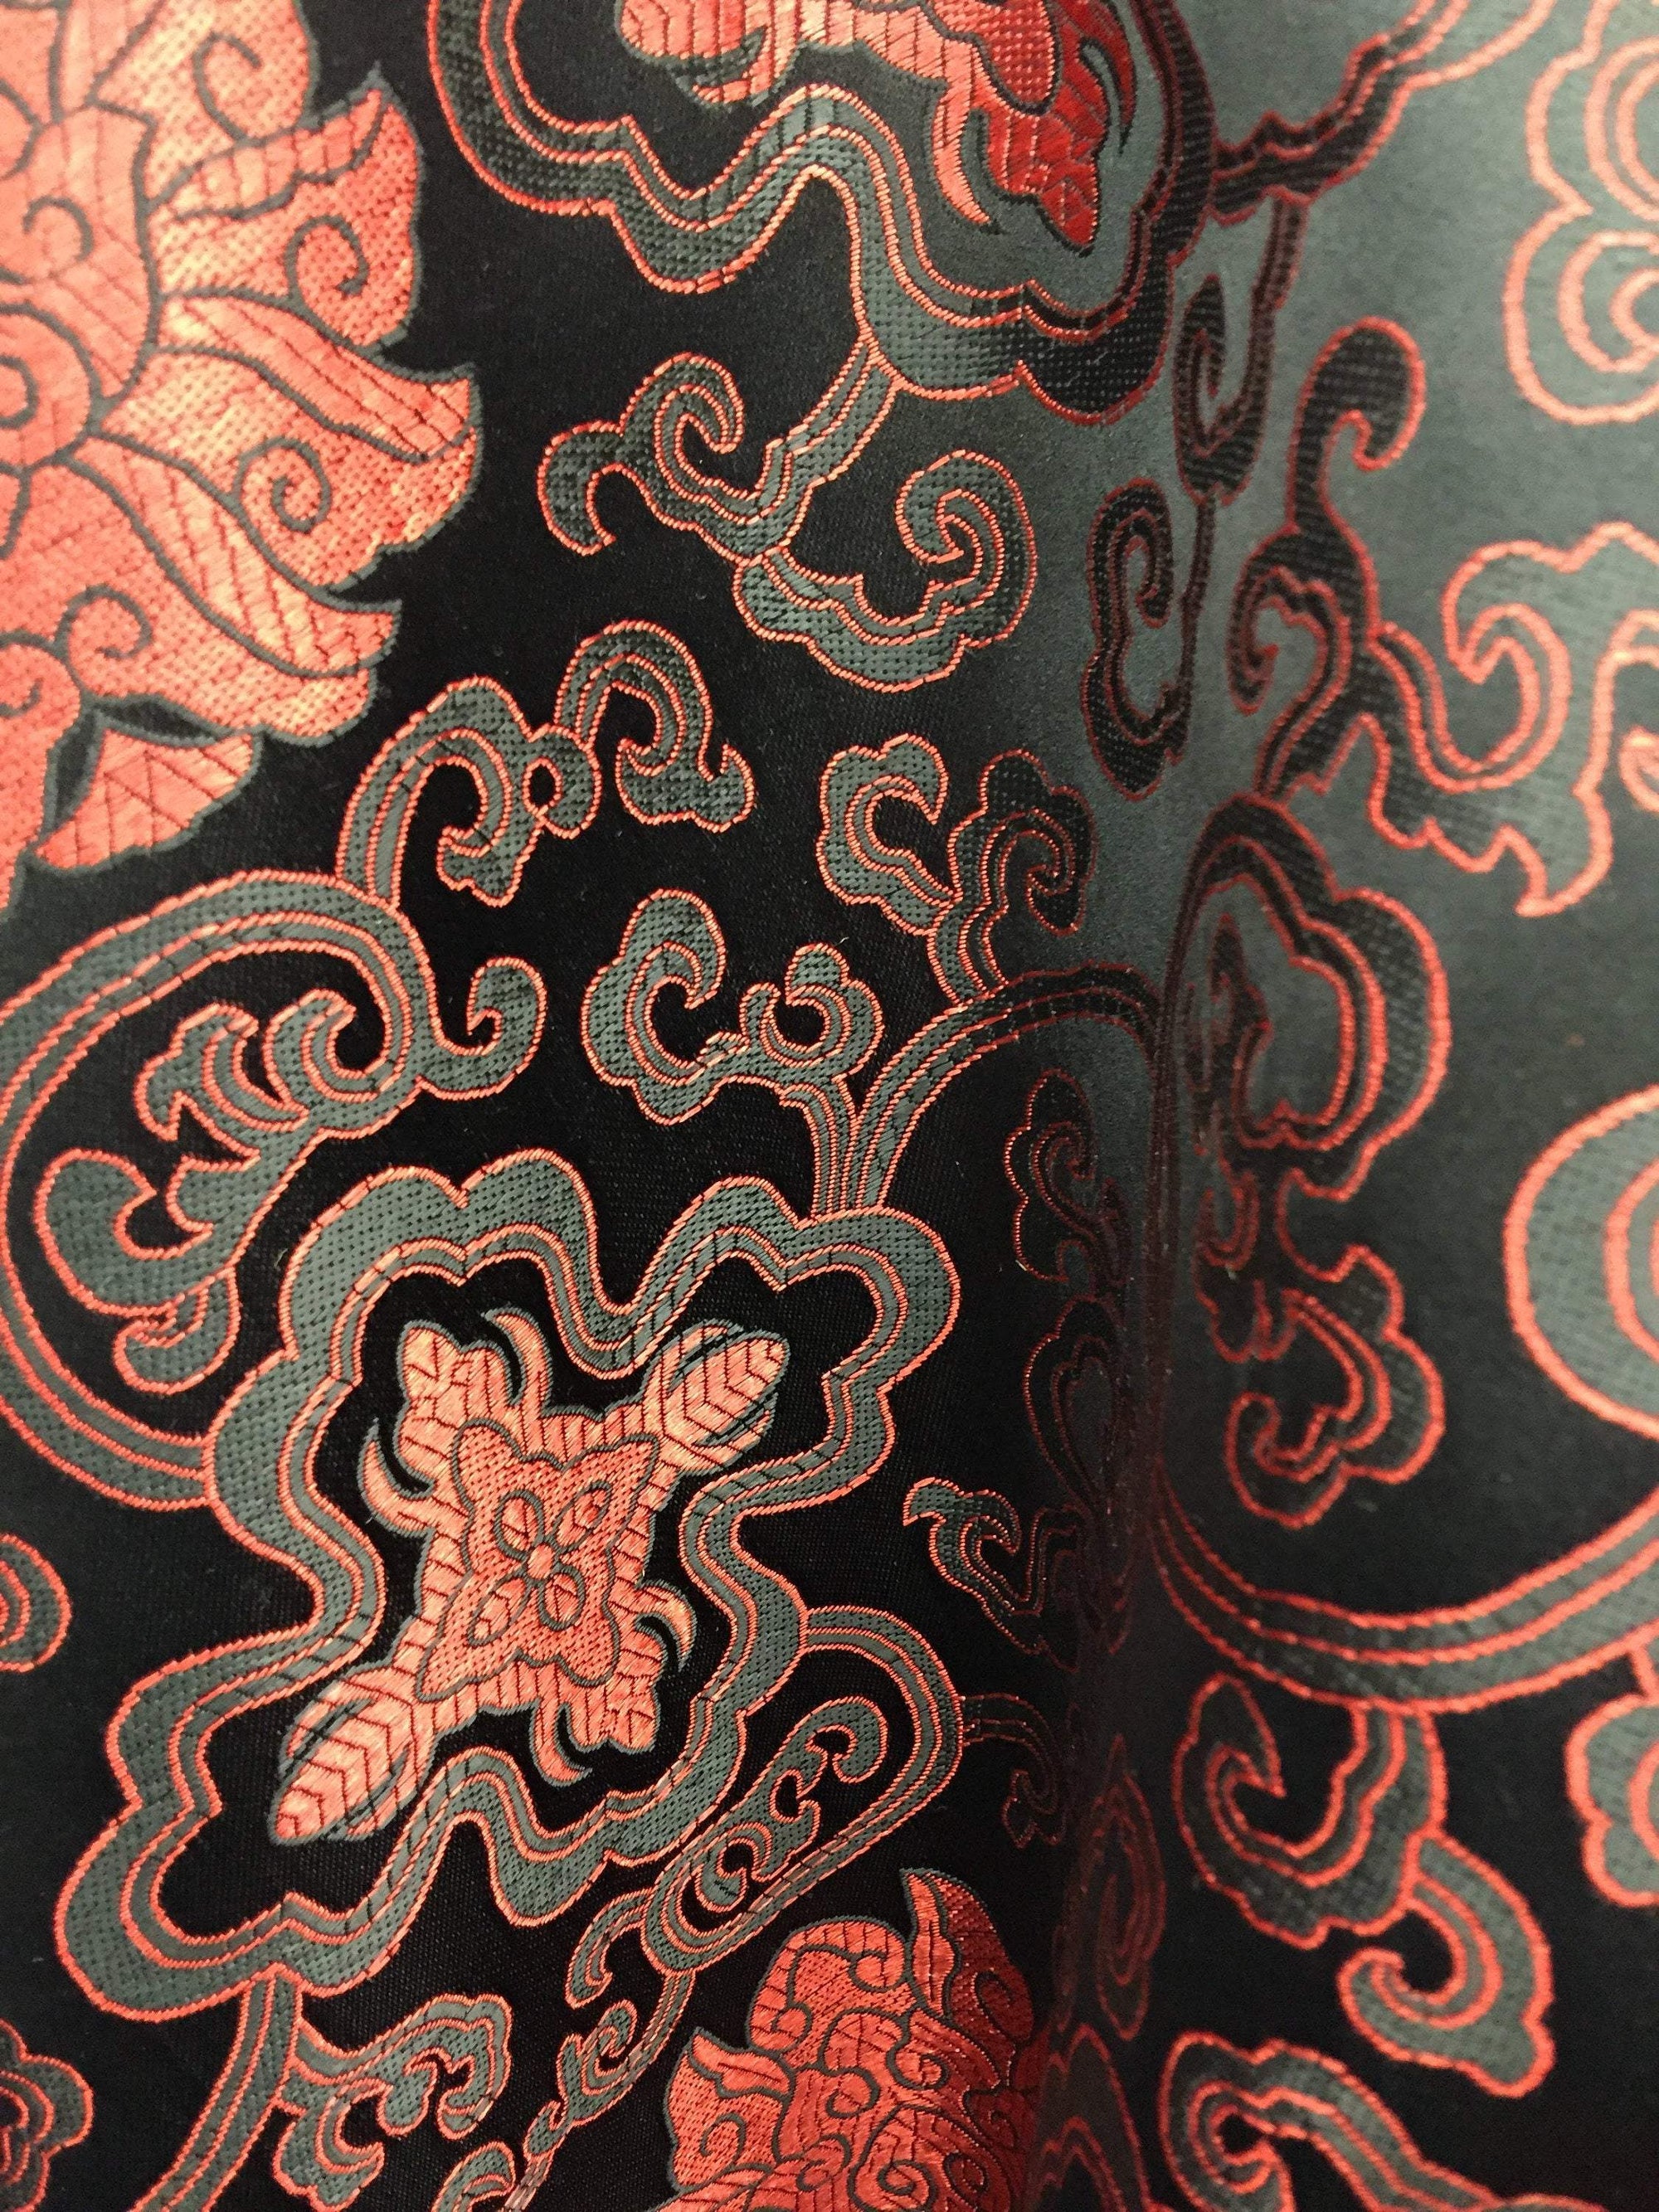 Adelaide BLACK RED Chinese Brocade Satin Fabric by the Yard - 10058